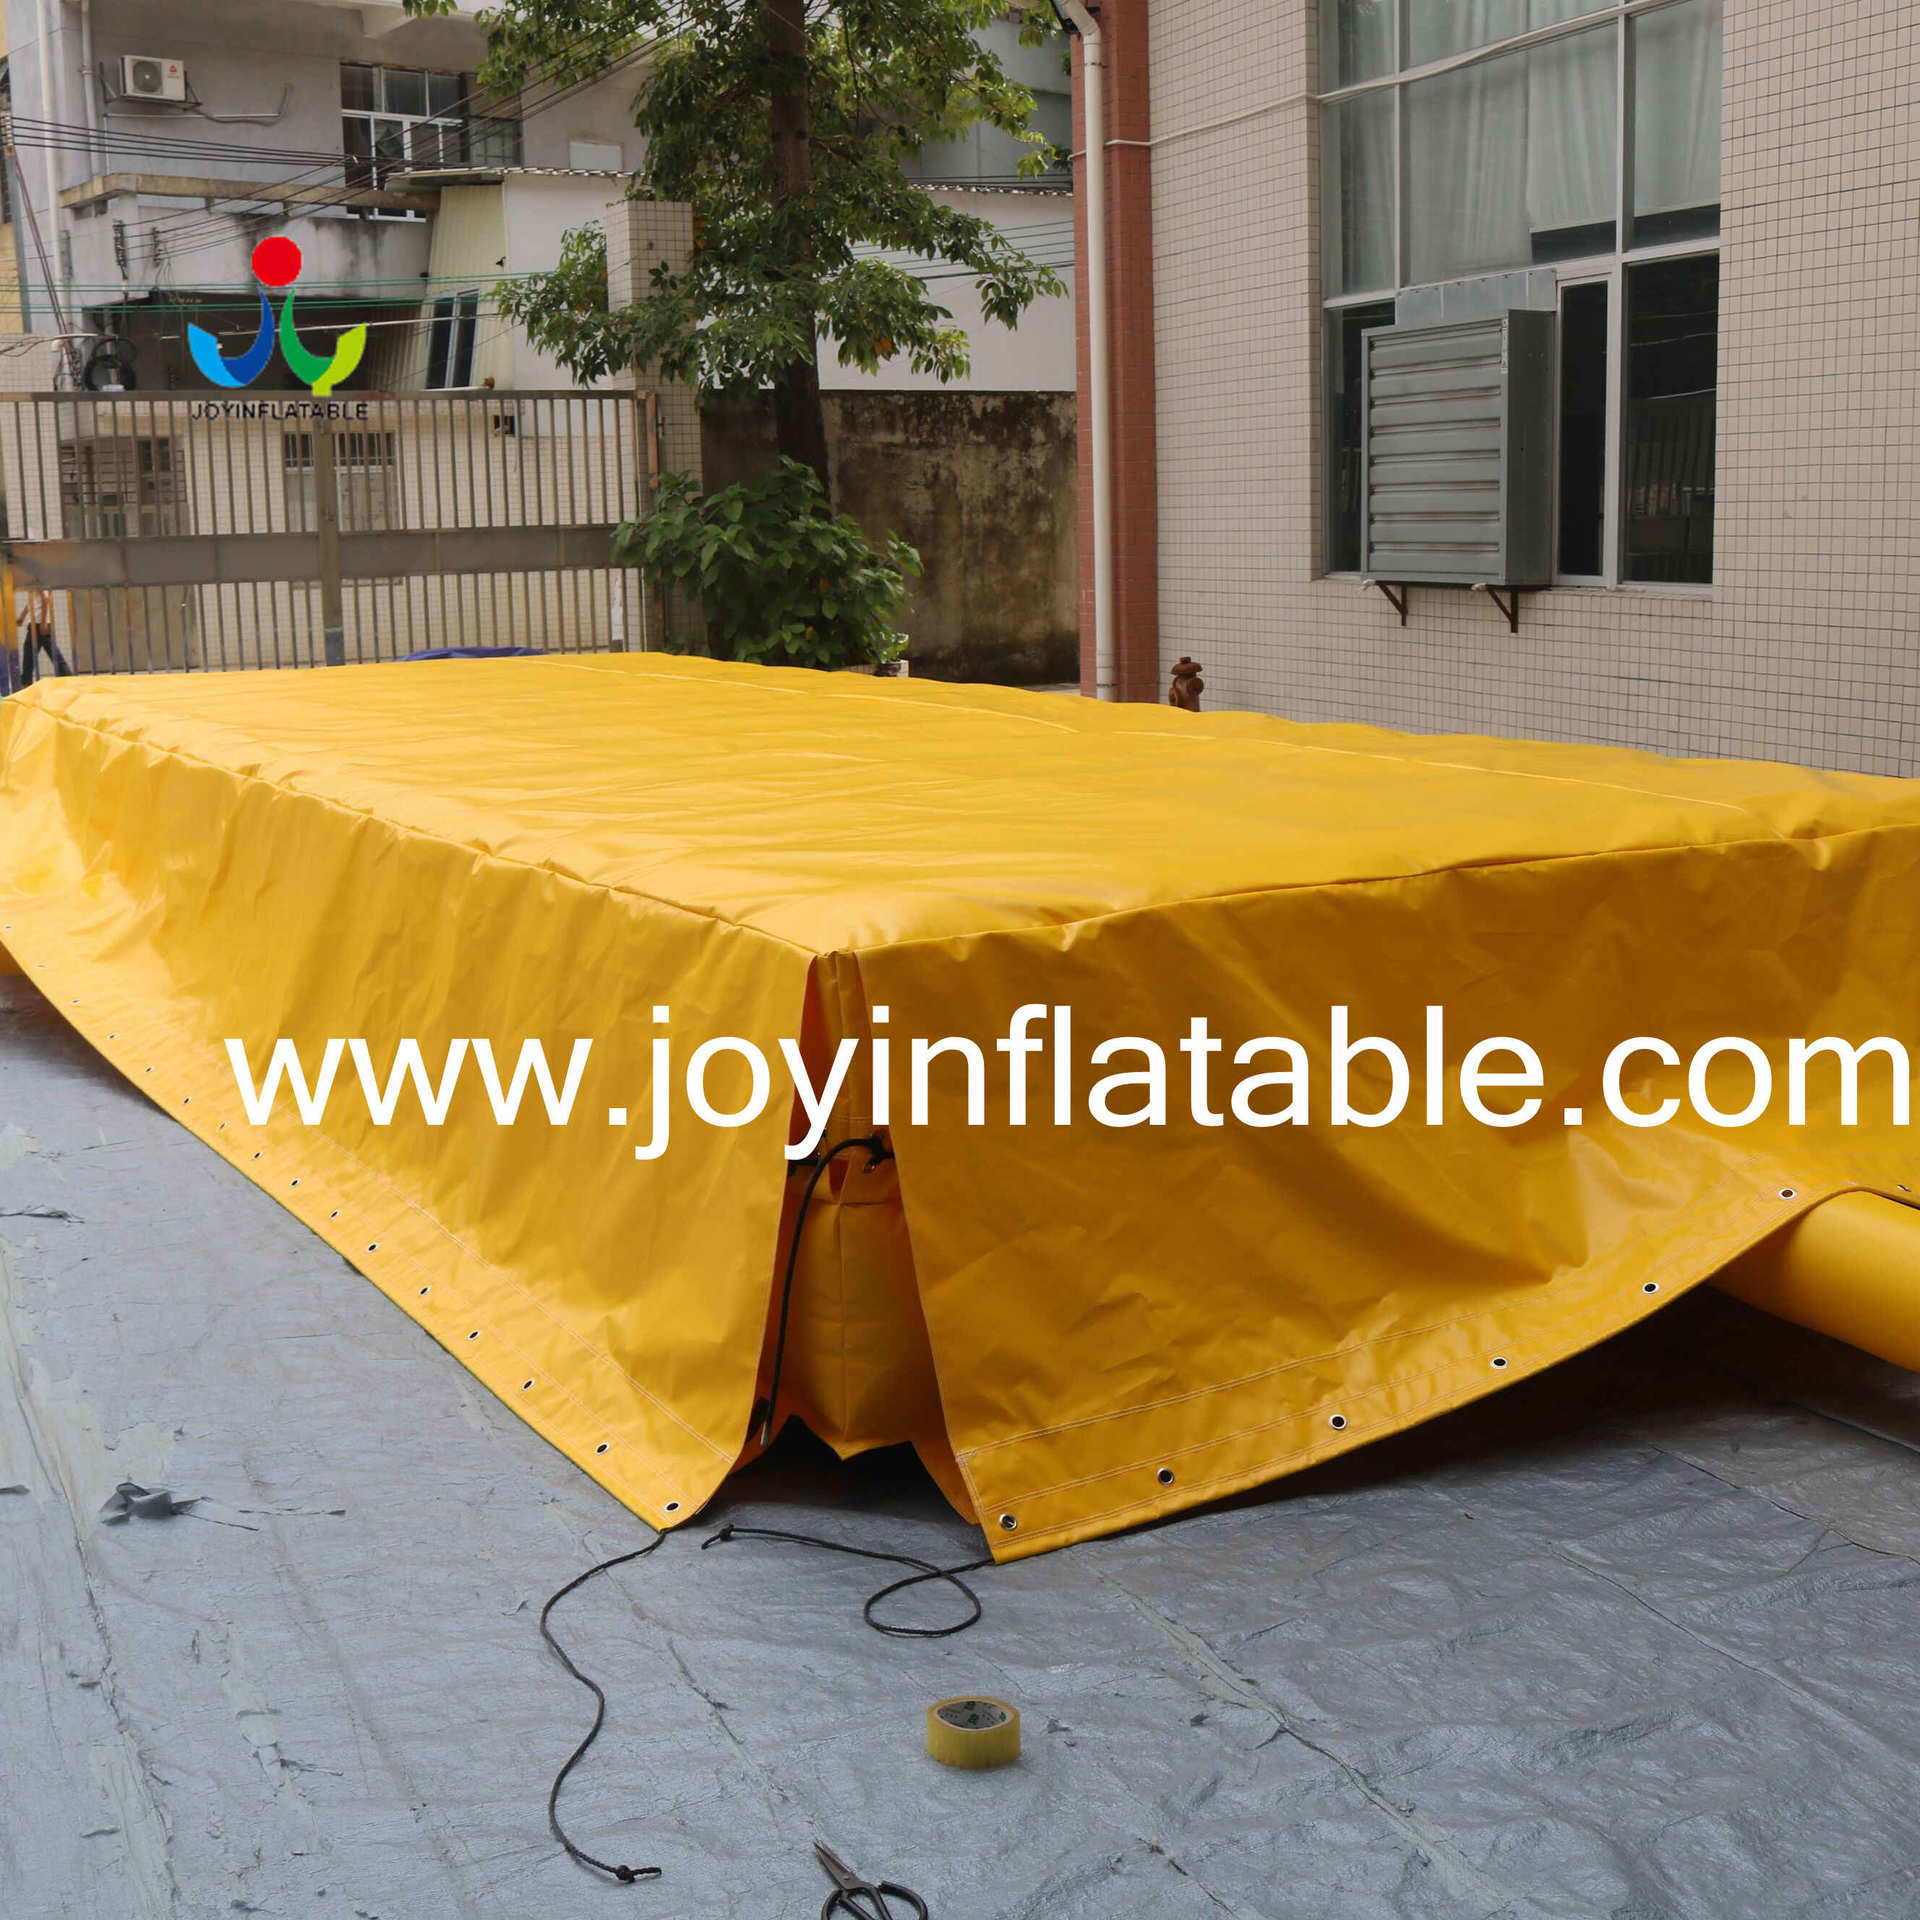 JOY inflatable New jump Air bag wholesale for outdoor activities